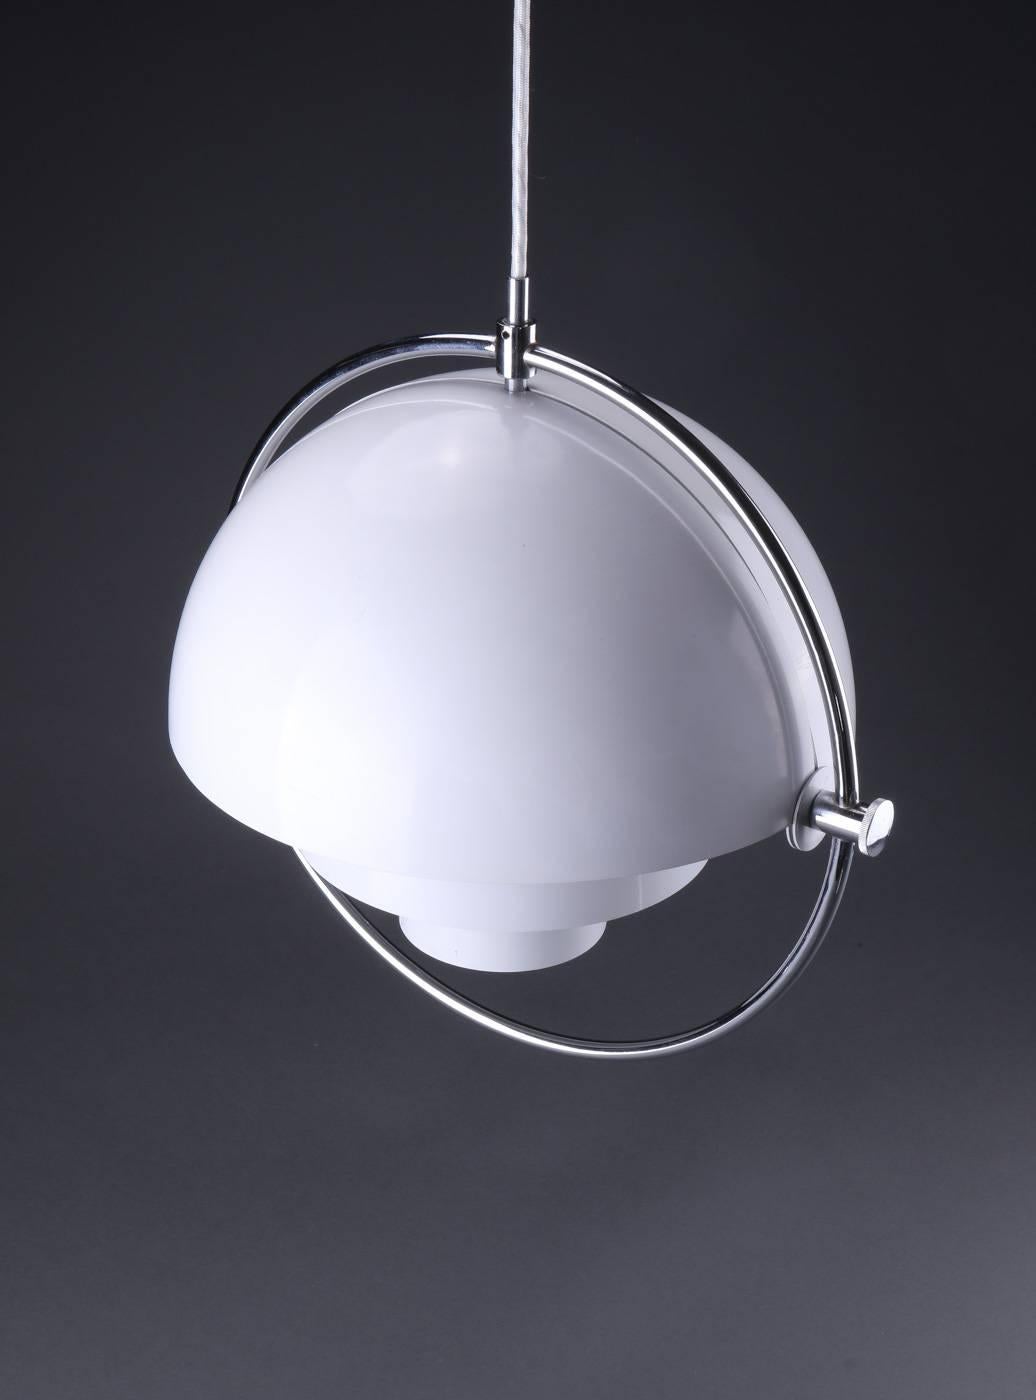 Original multi-light pendant by Louis Weisdorf for Lyfa, Denmark, circa 1970s.
Existing wiring, rewiring available upon request.